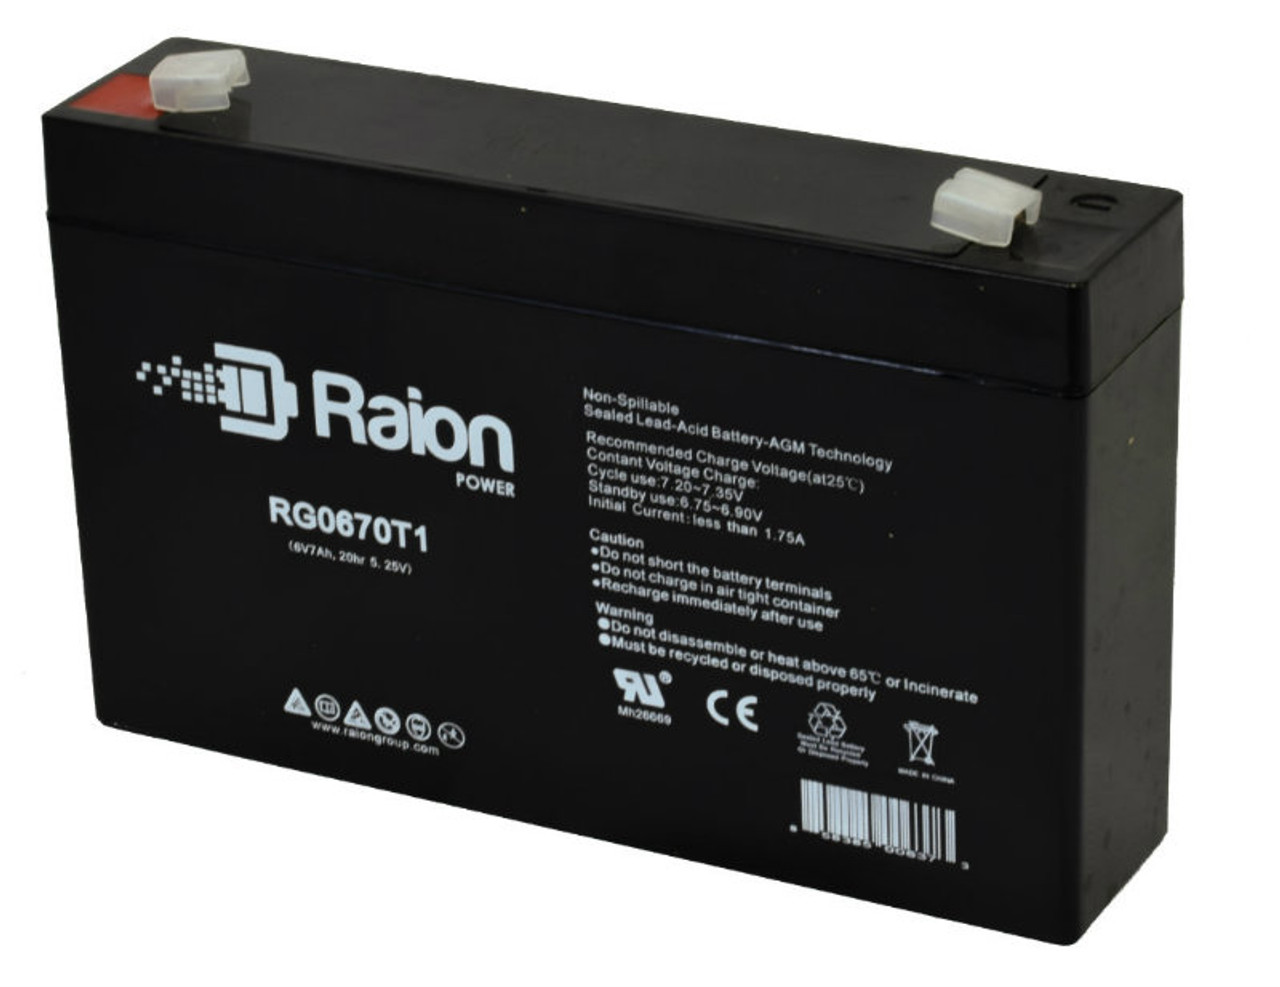 Raion Power RG0670T1 6V 7Ah Replacement Emergency Lighting Battery for Hubbell 12-927